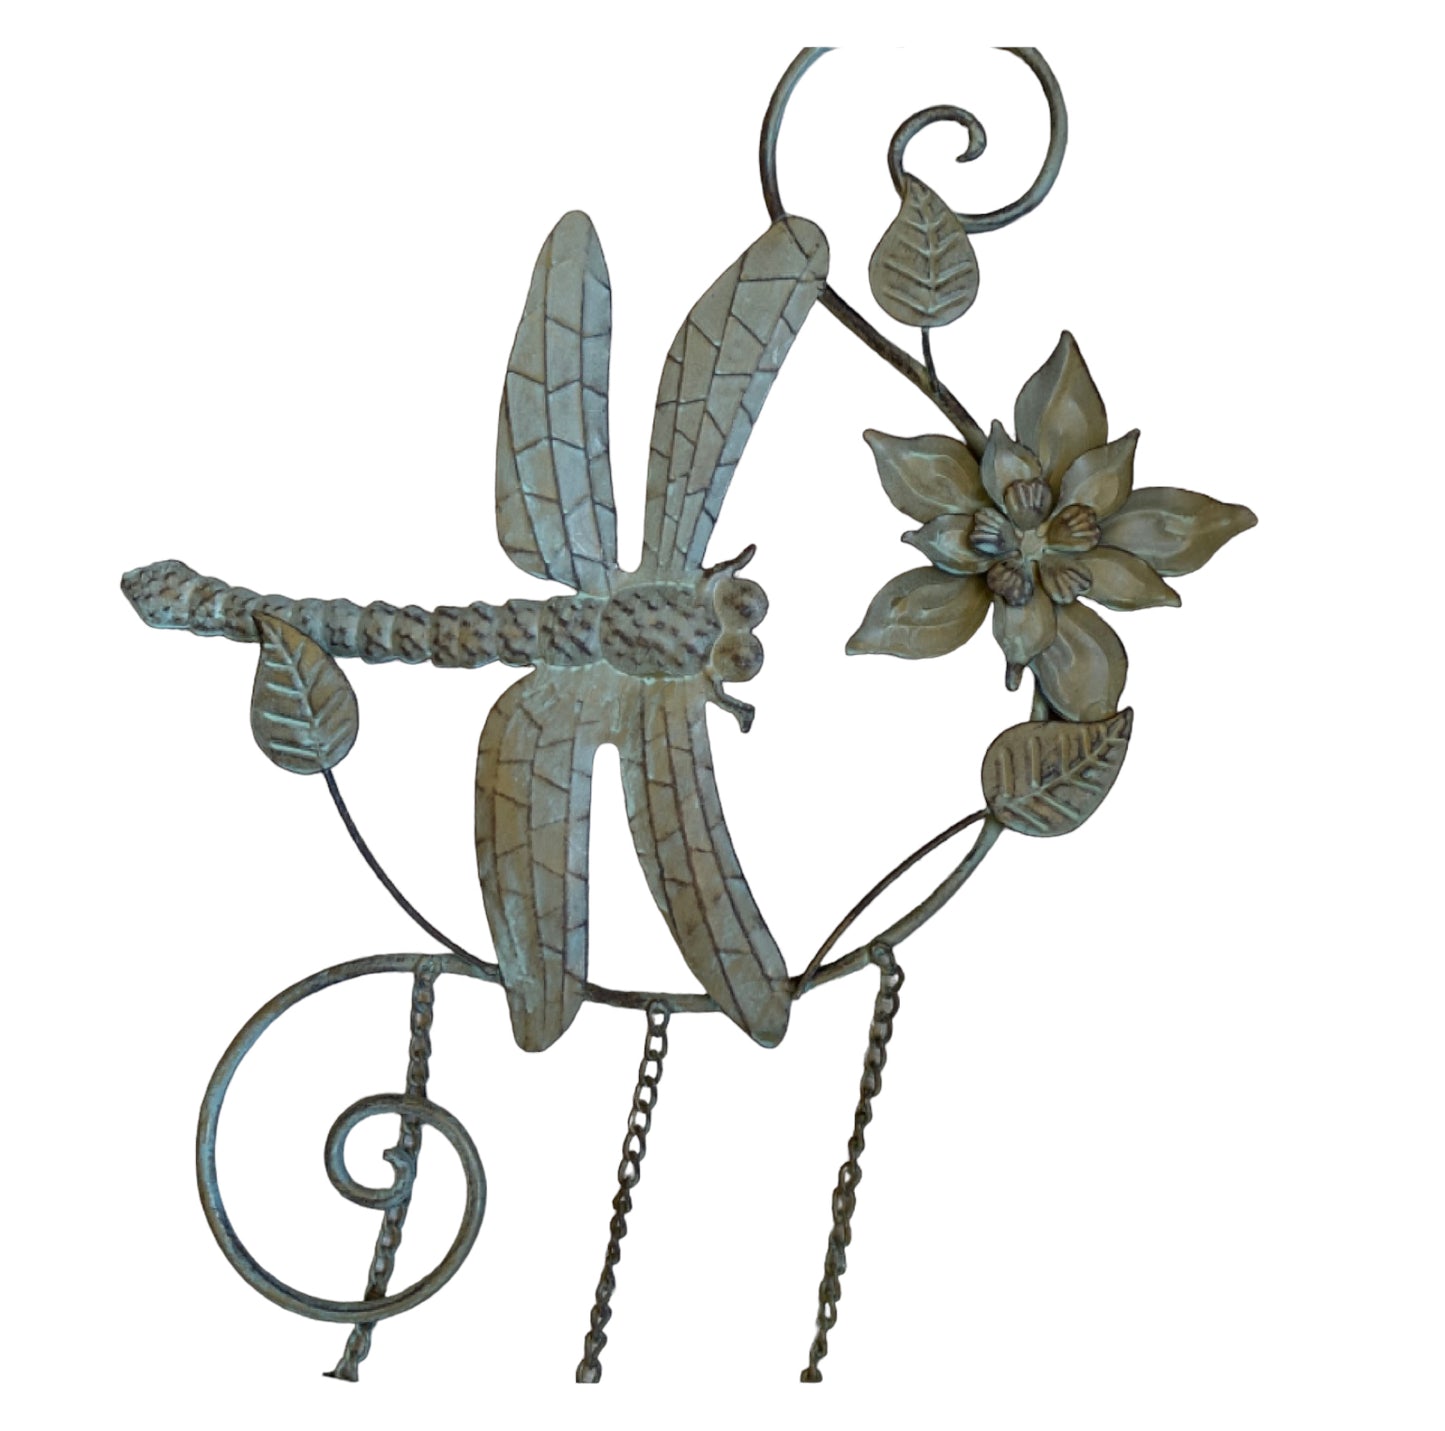 Wind Chime Windchime Dragonfly Antique Garden - The Renmy Store Homewares & Gifts 